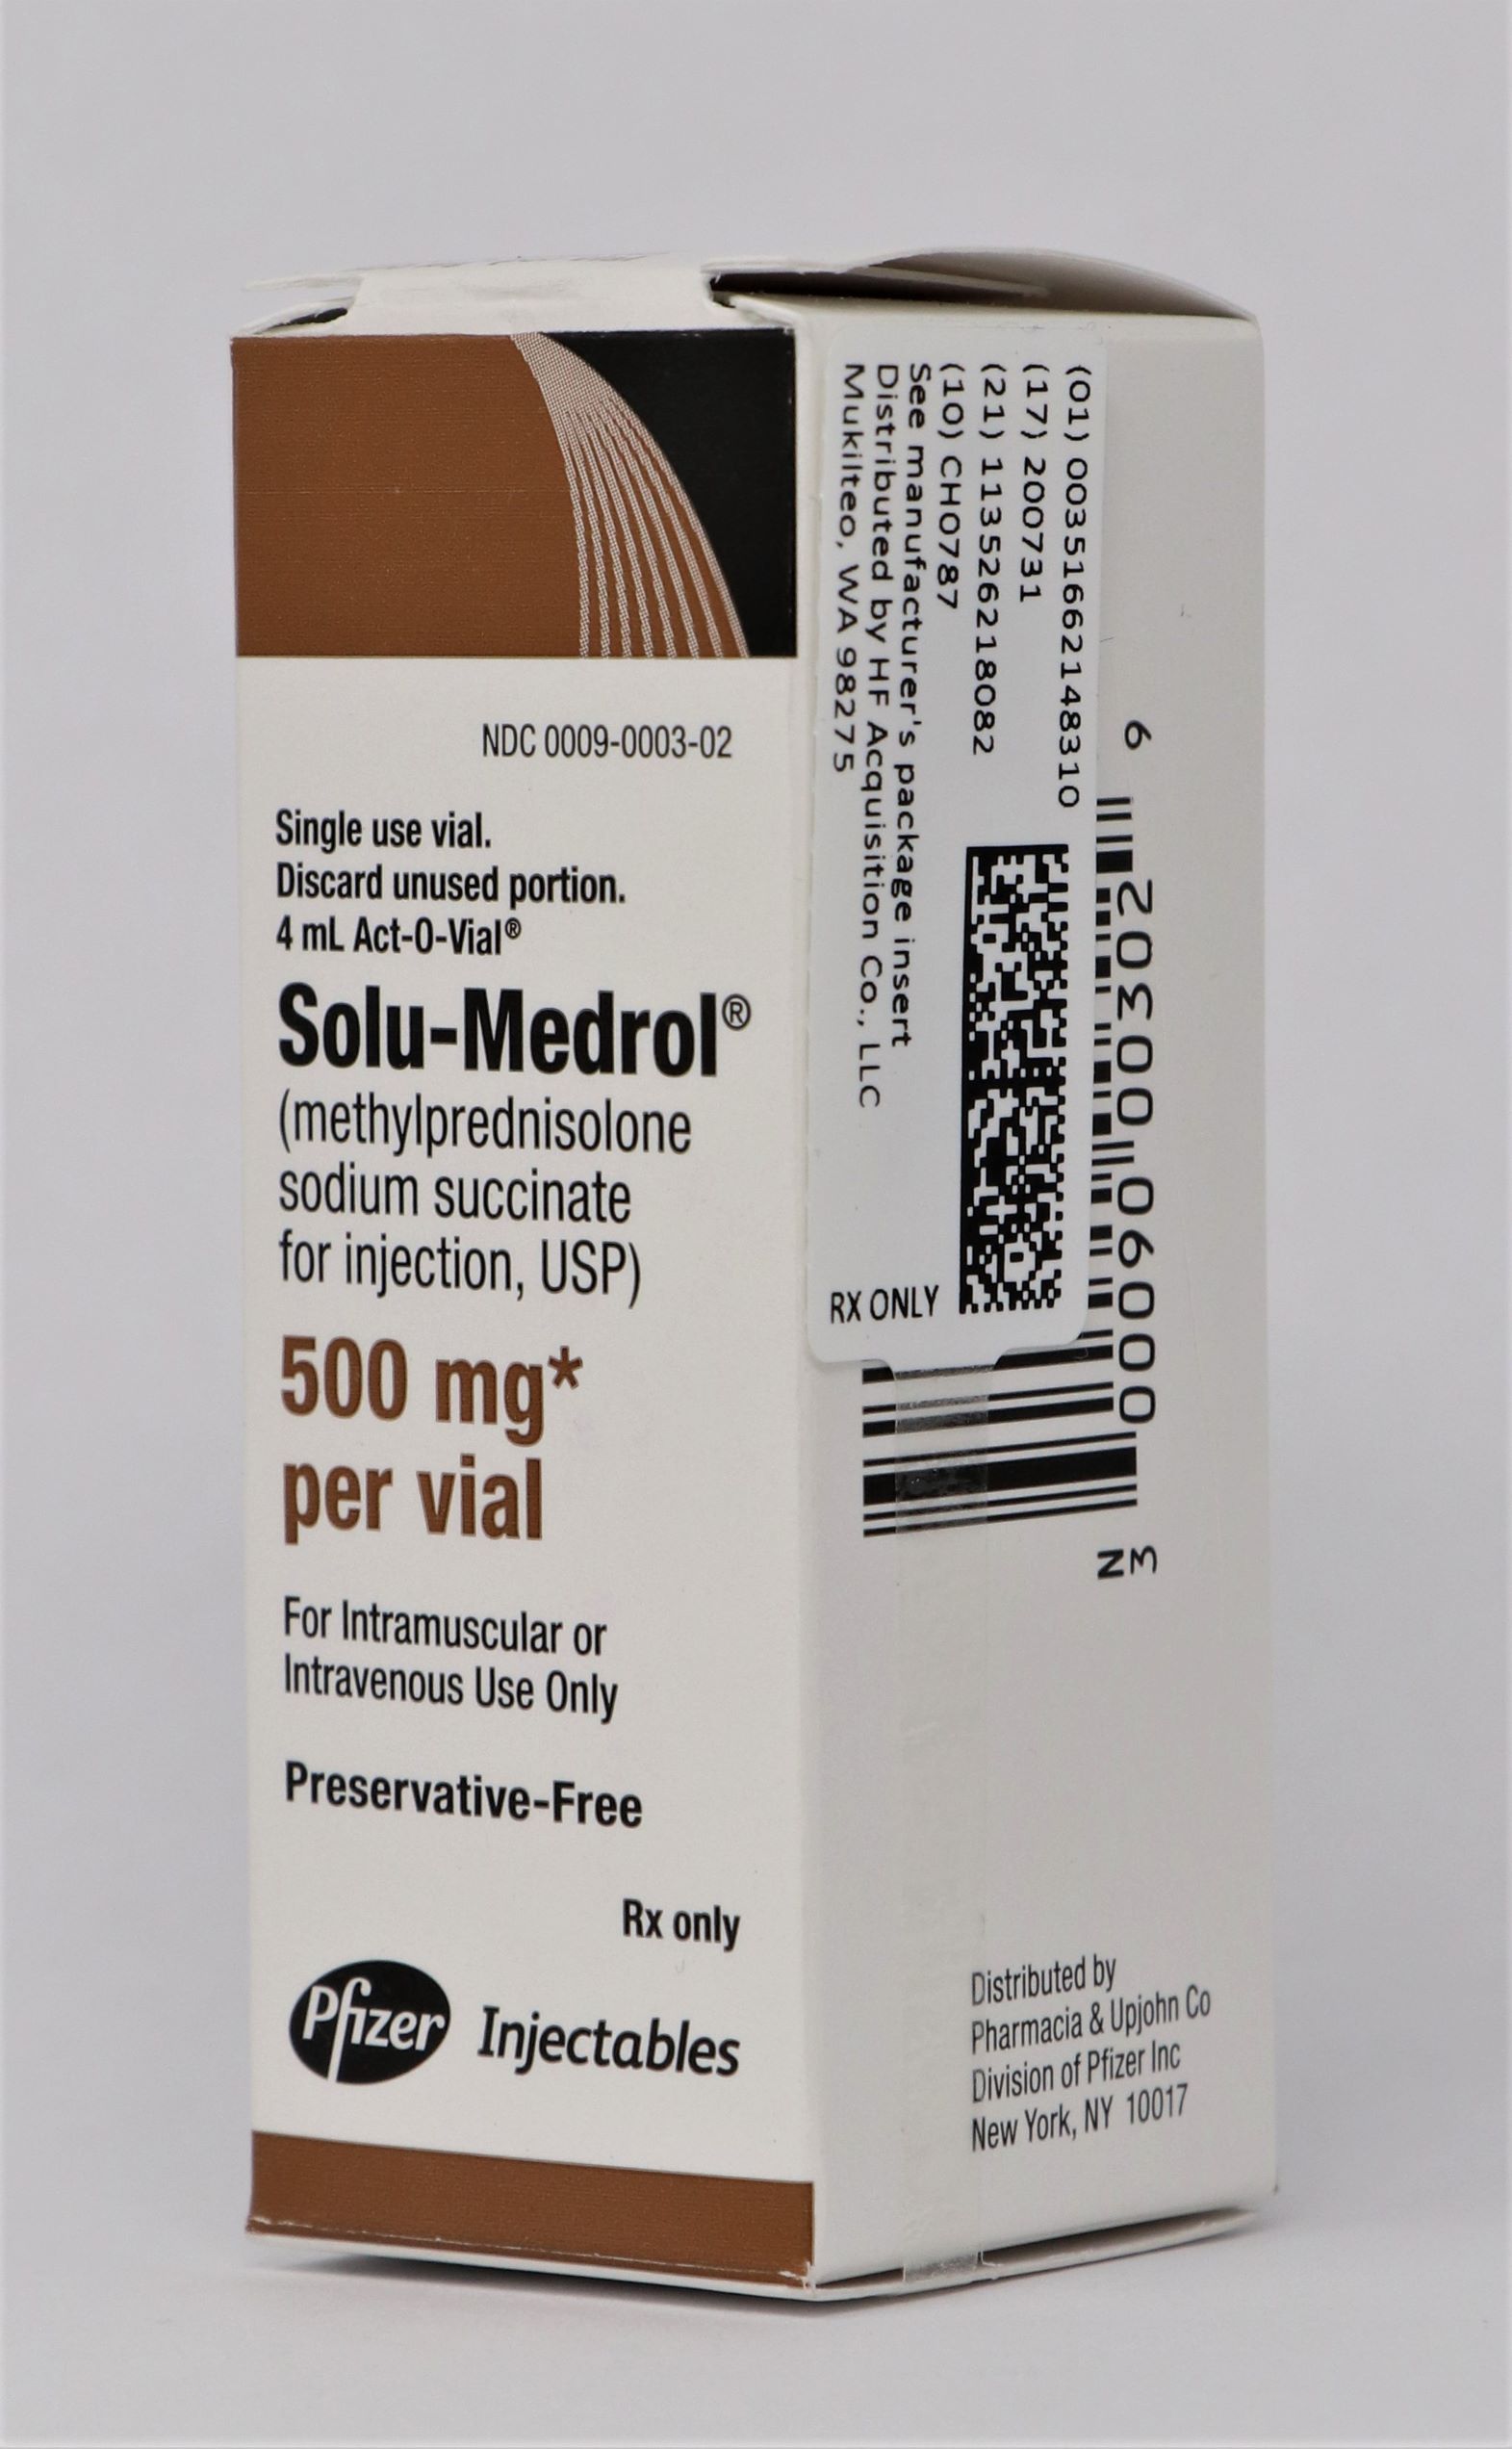 SERIALIZED CARTON LABELING